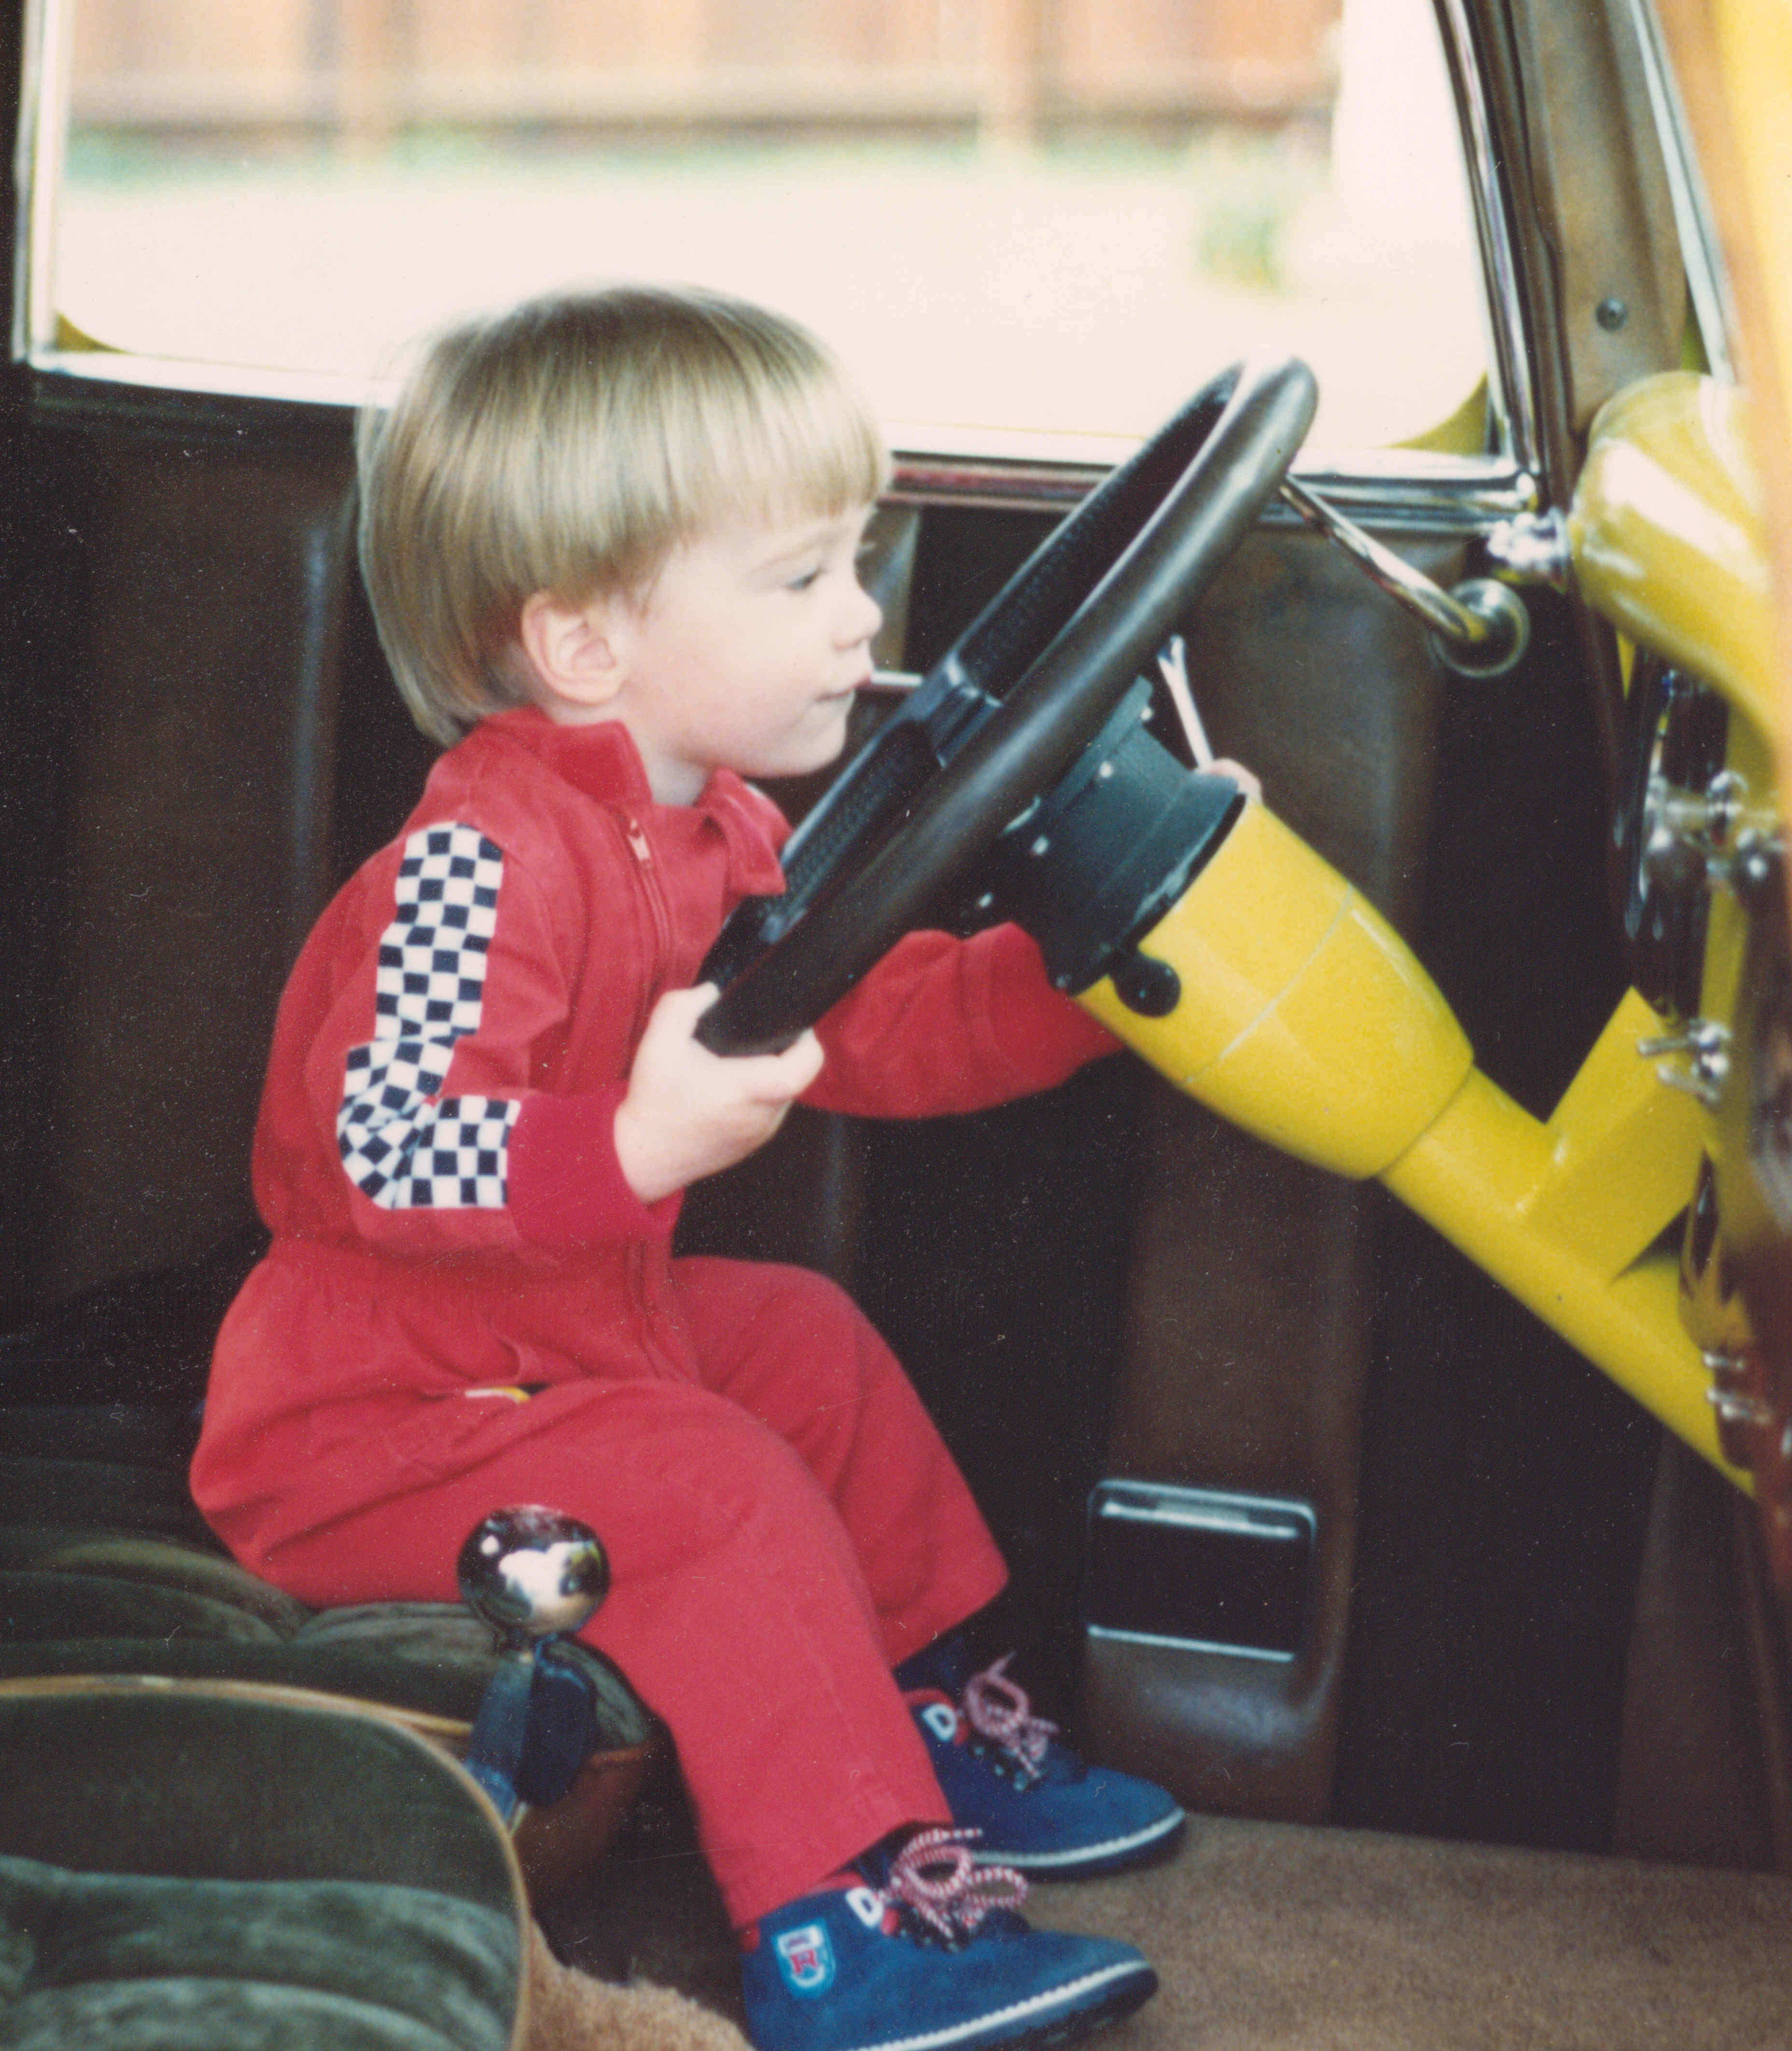 Driving skills started early.